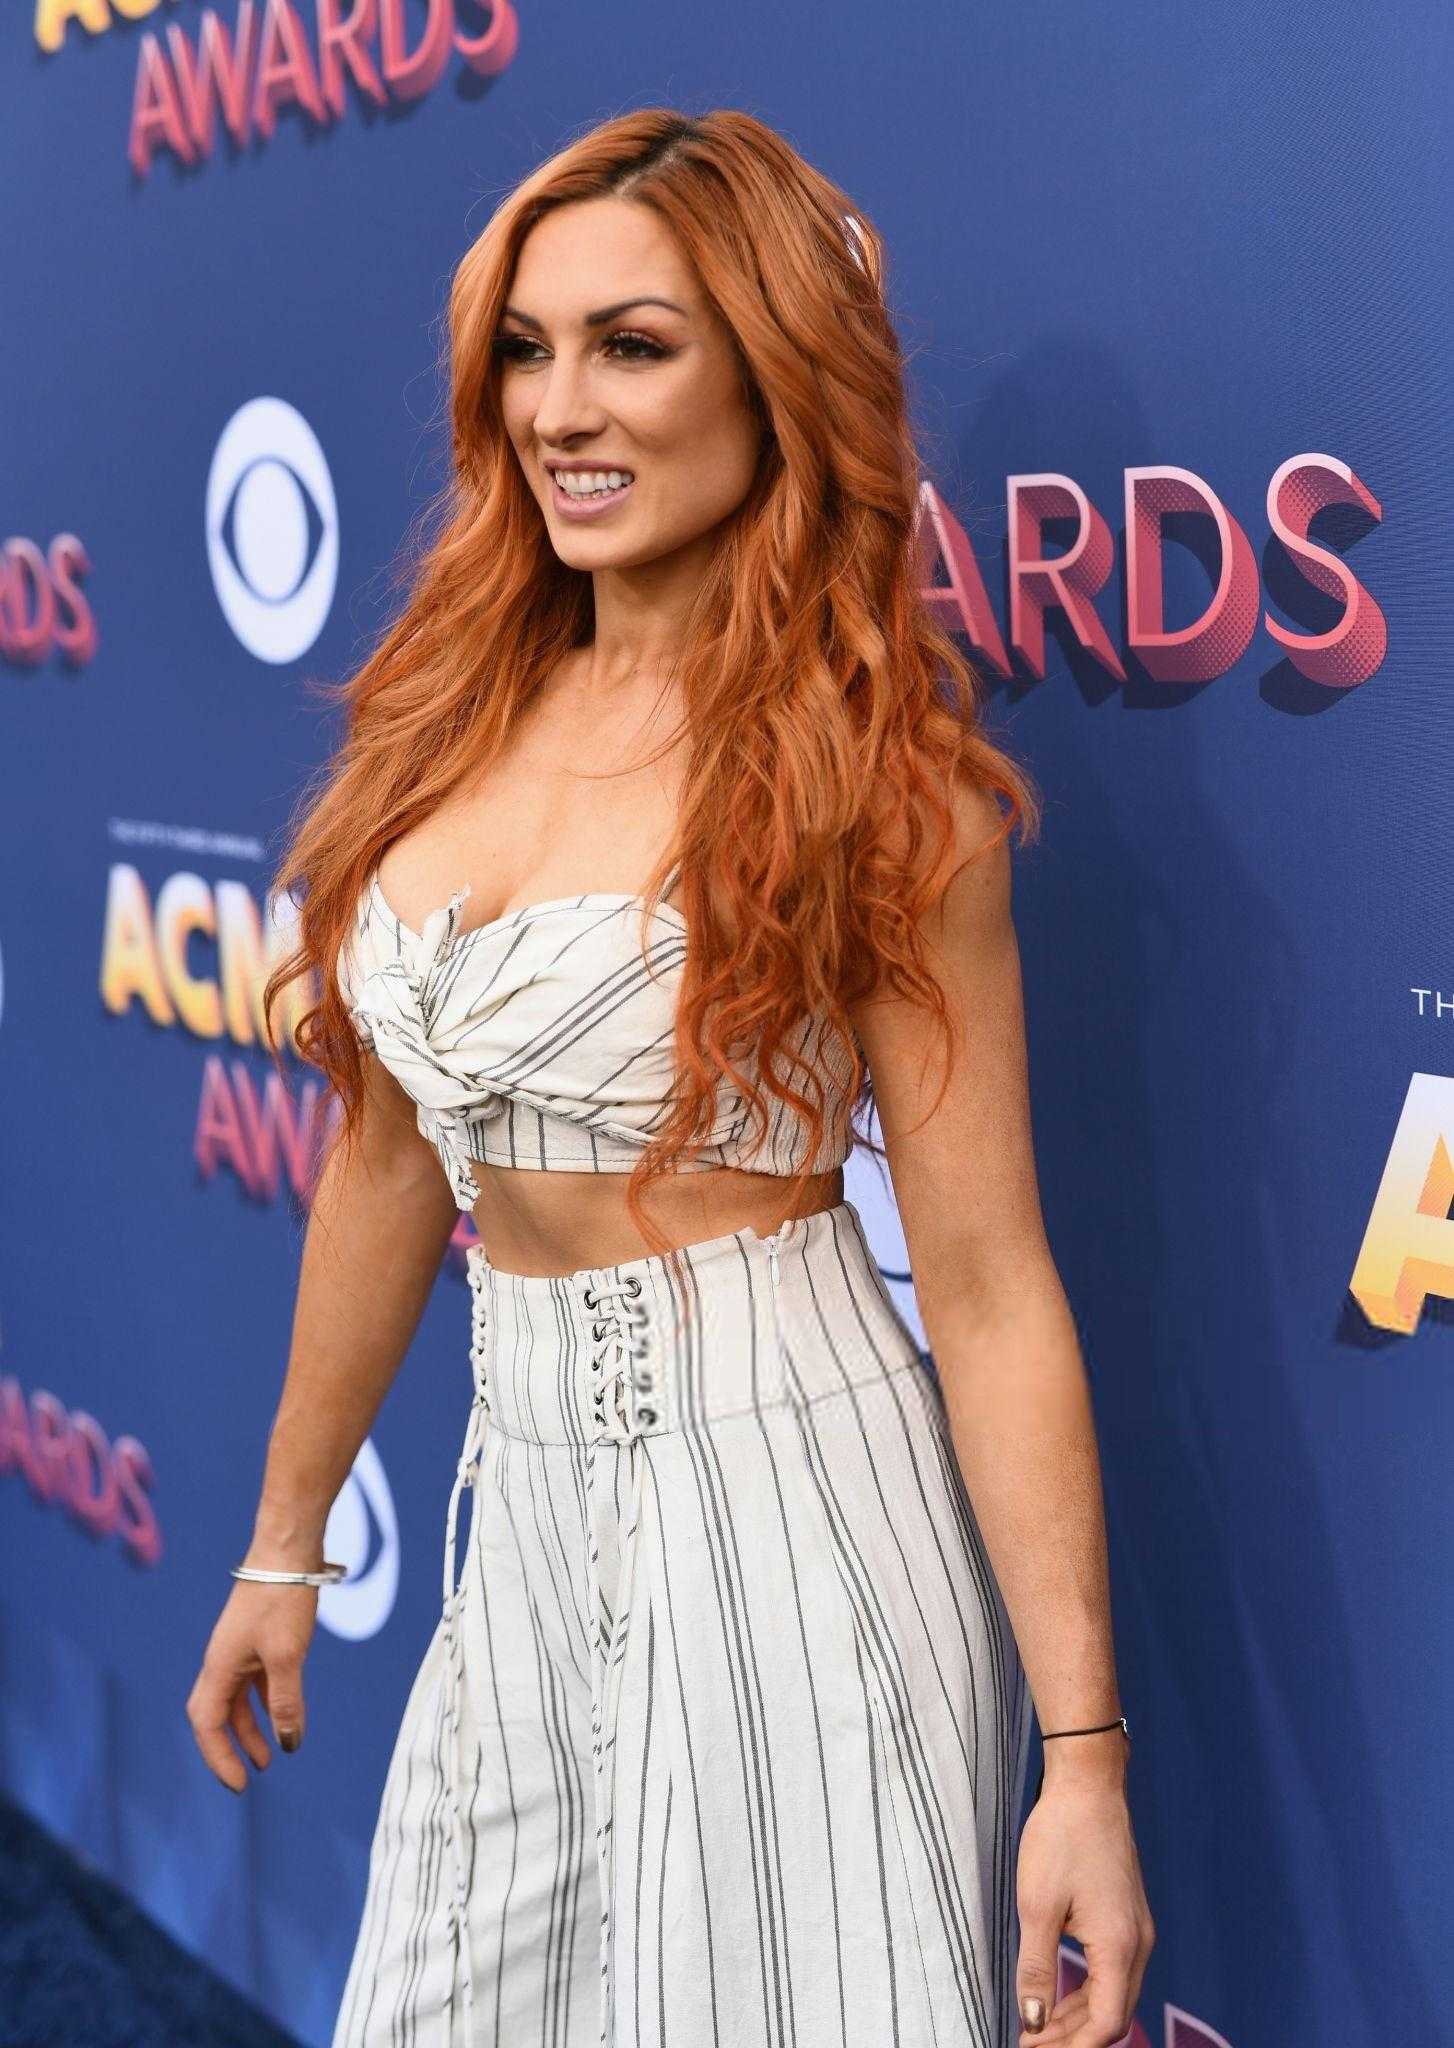 70+ Hot And Sexy Pictures of Becky Lynch – WWE Diva Will Sizzle You Up 54